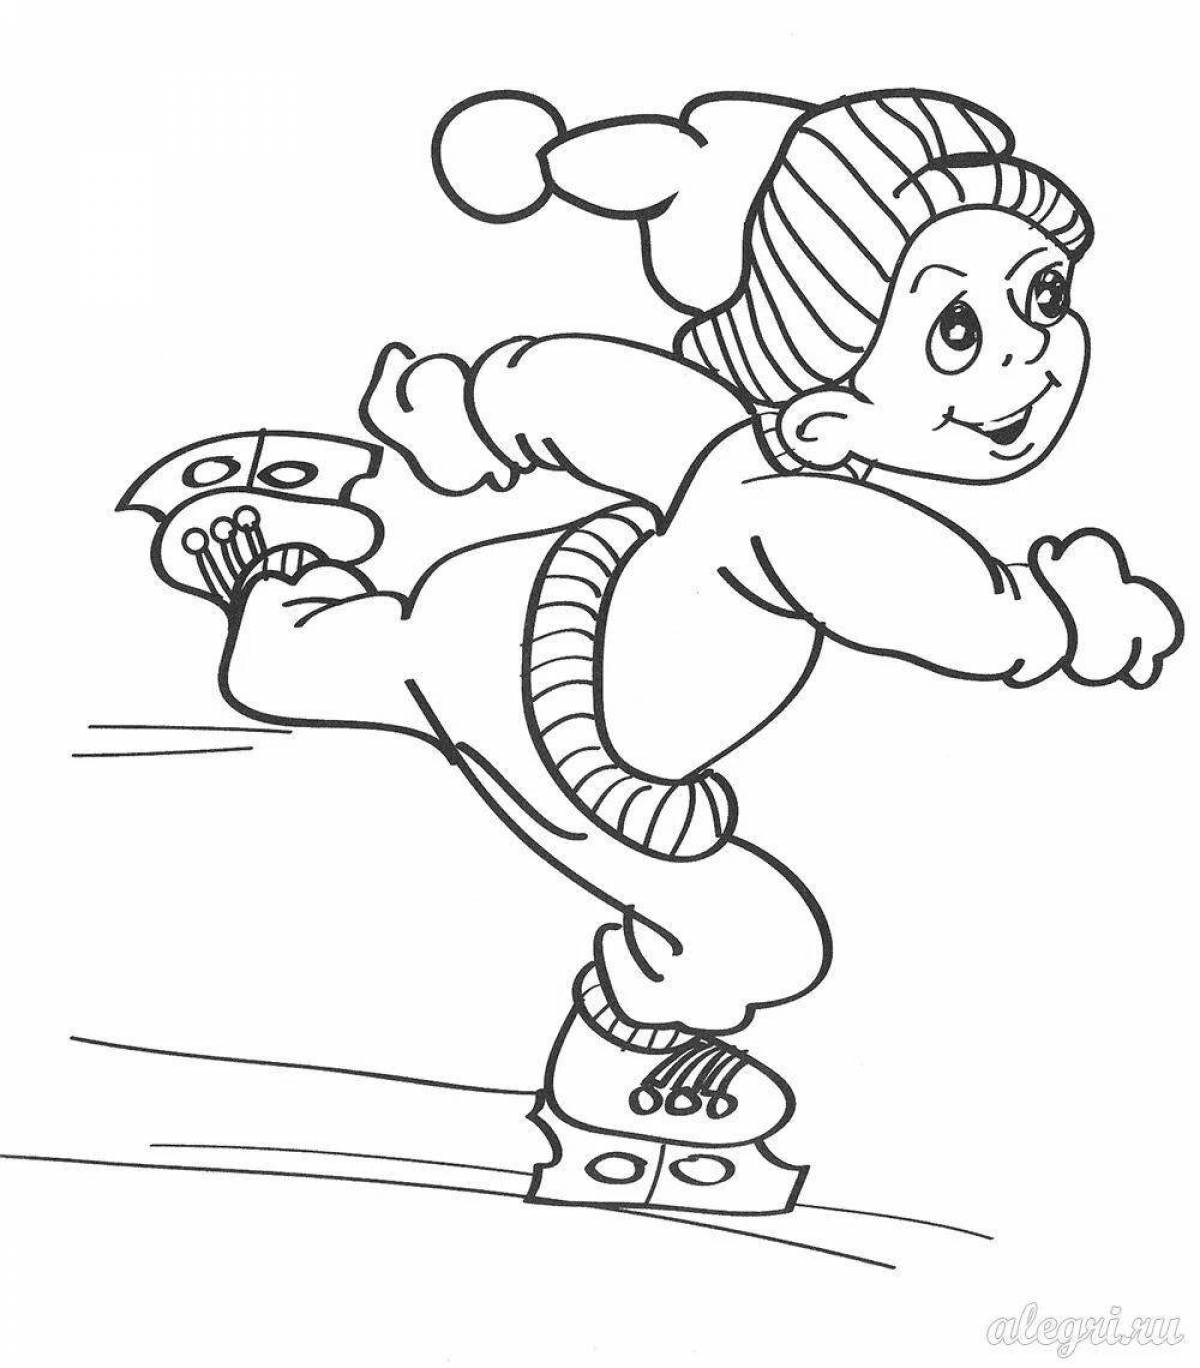 Adorable winter sports coloring book for 4-5 year olds